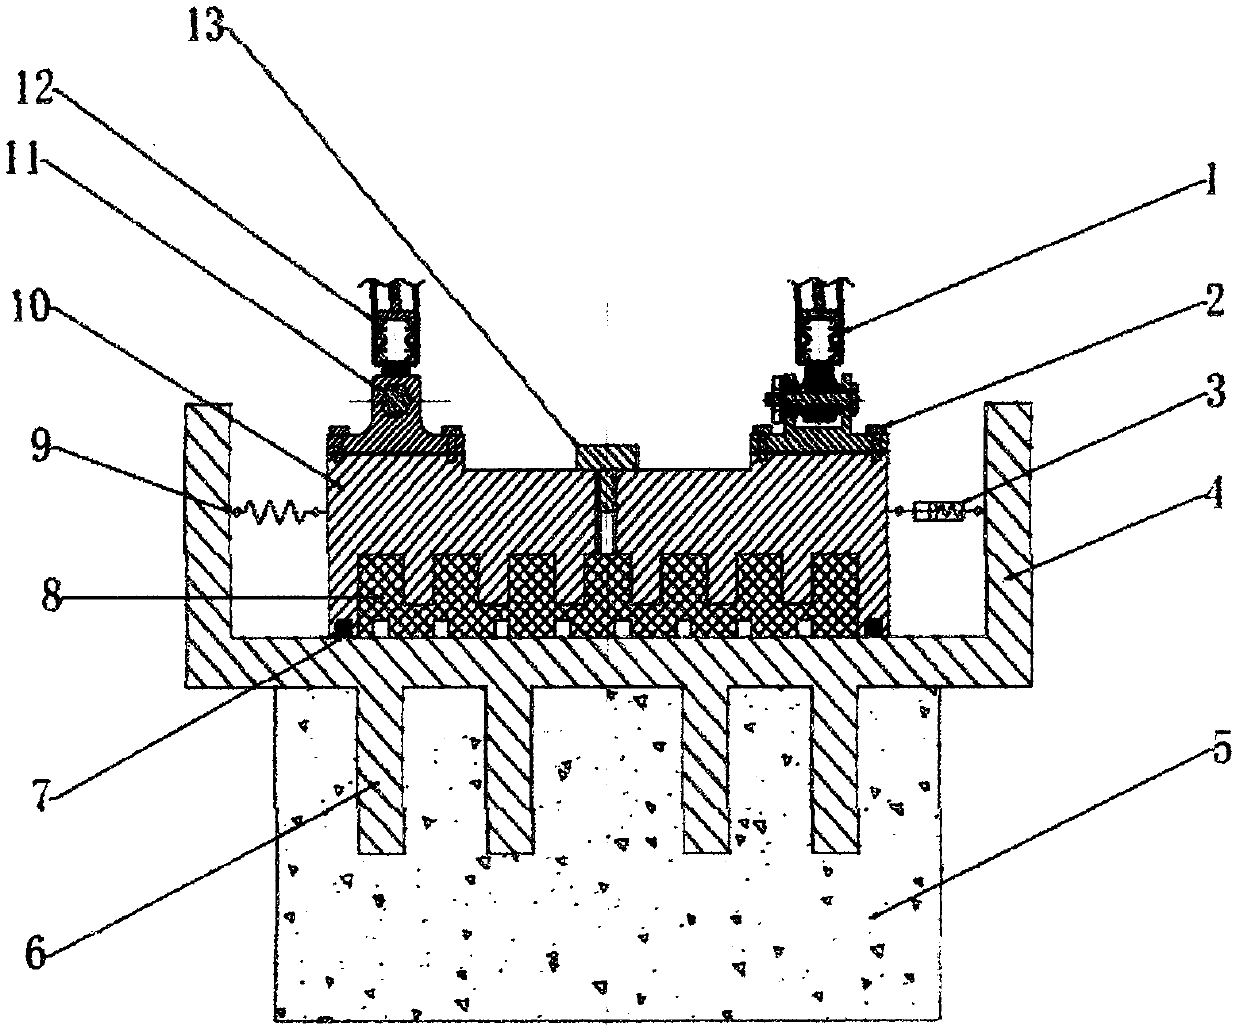 Building structural foundation with three-dimensional shock insulation and vibration attenuation